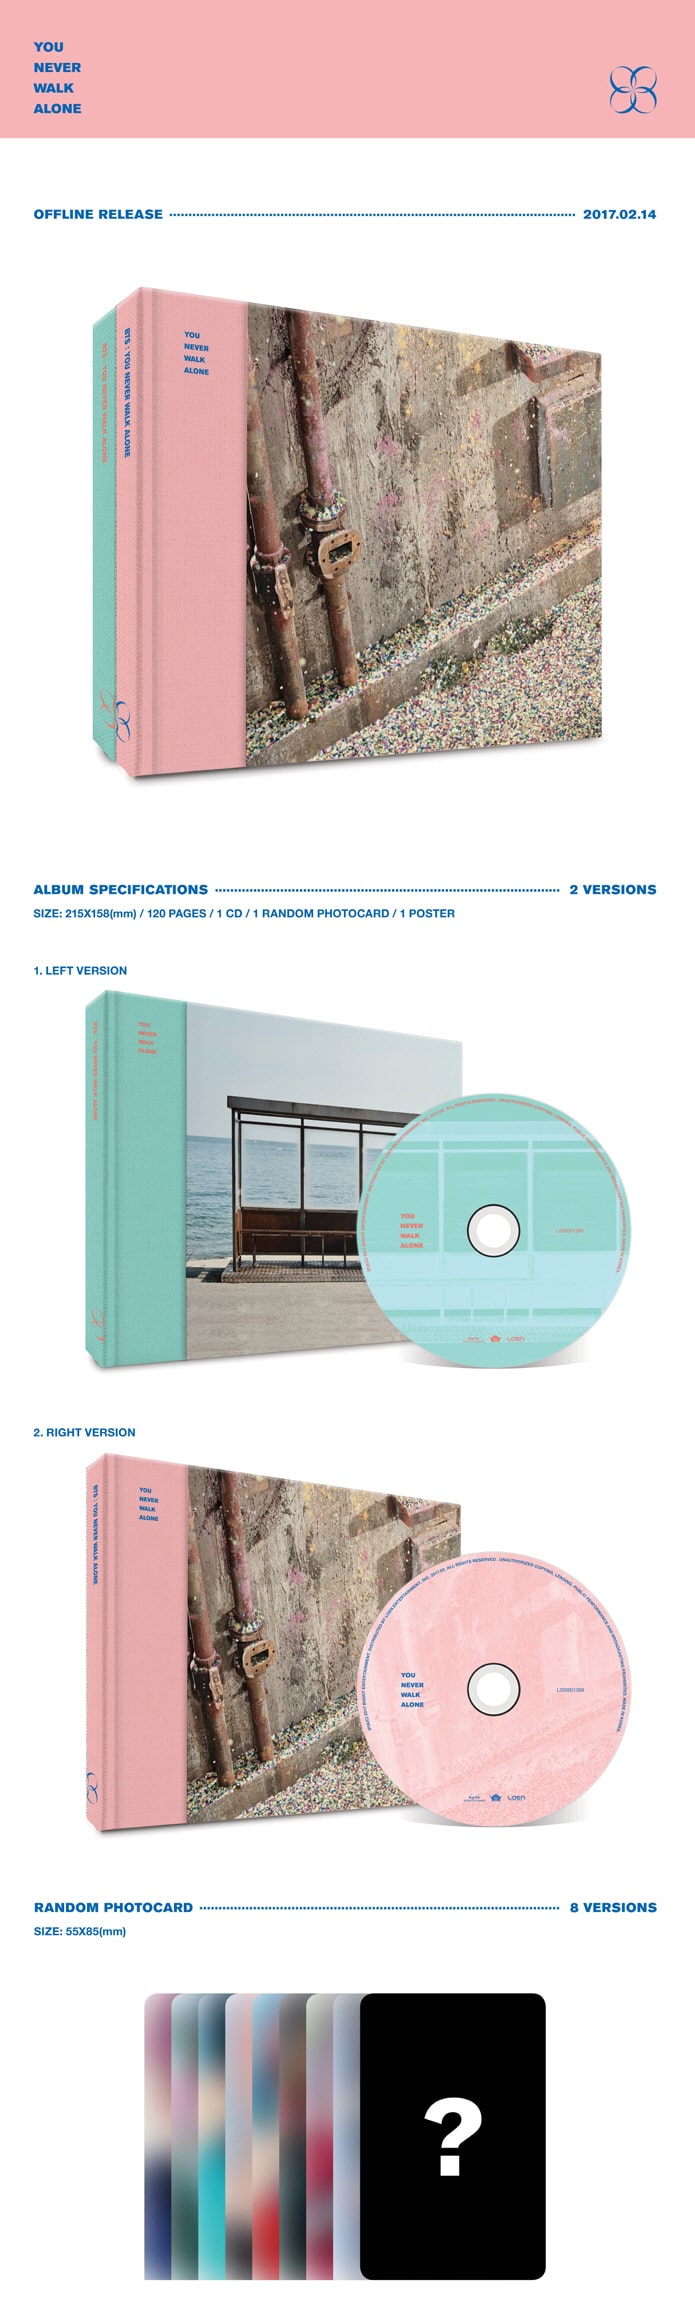 Bts You Never Walk Alone Right Ver Catchopcd